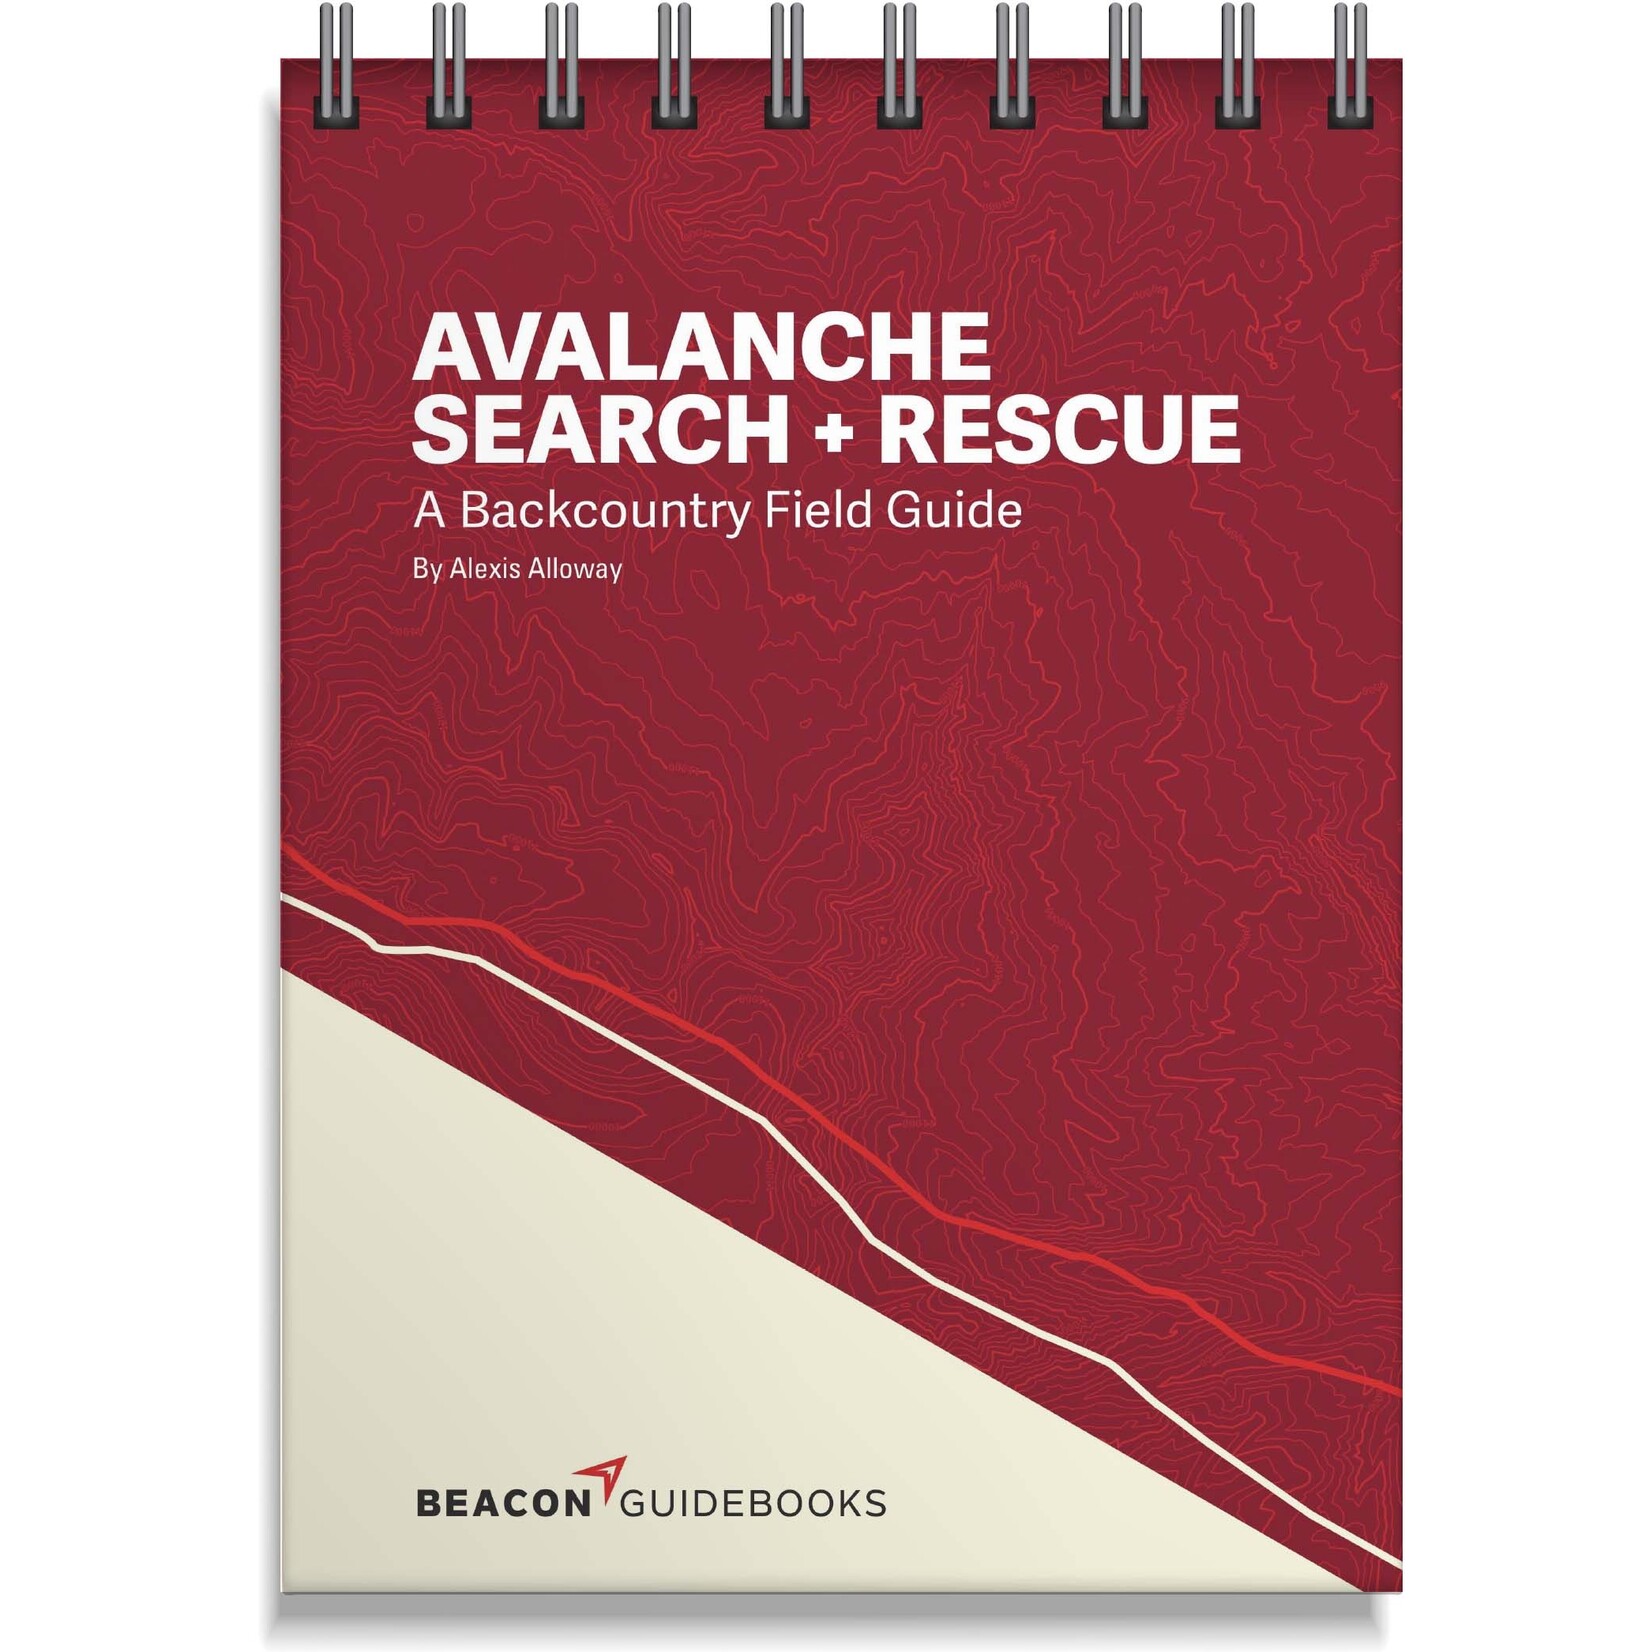 Beacon Guidebooks Avalanche Search and Rescue Field Guide